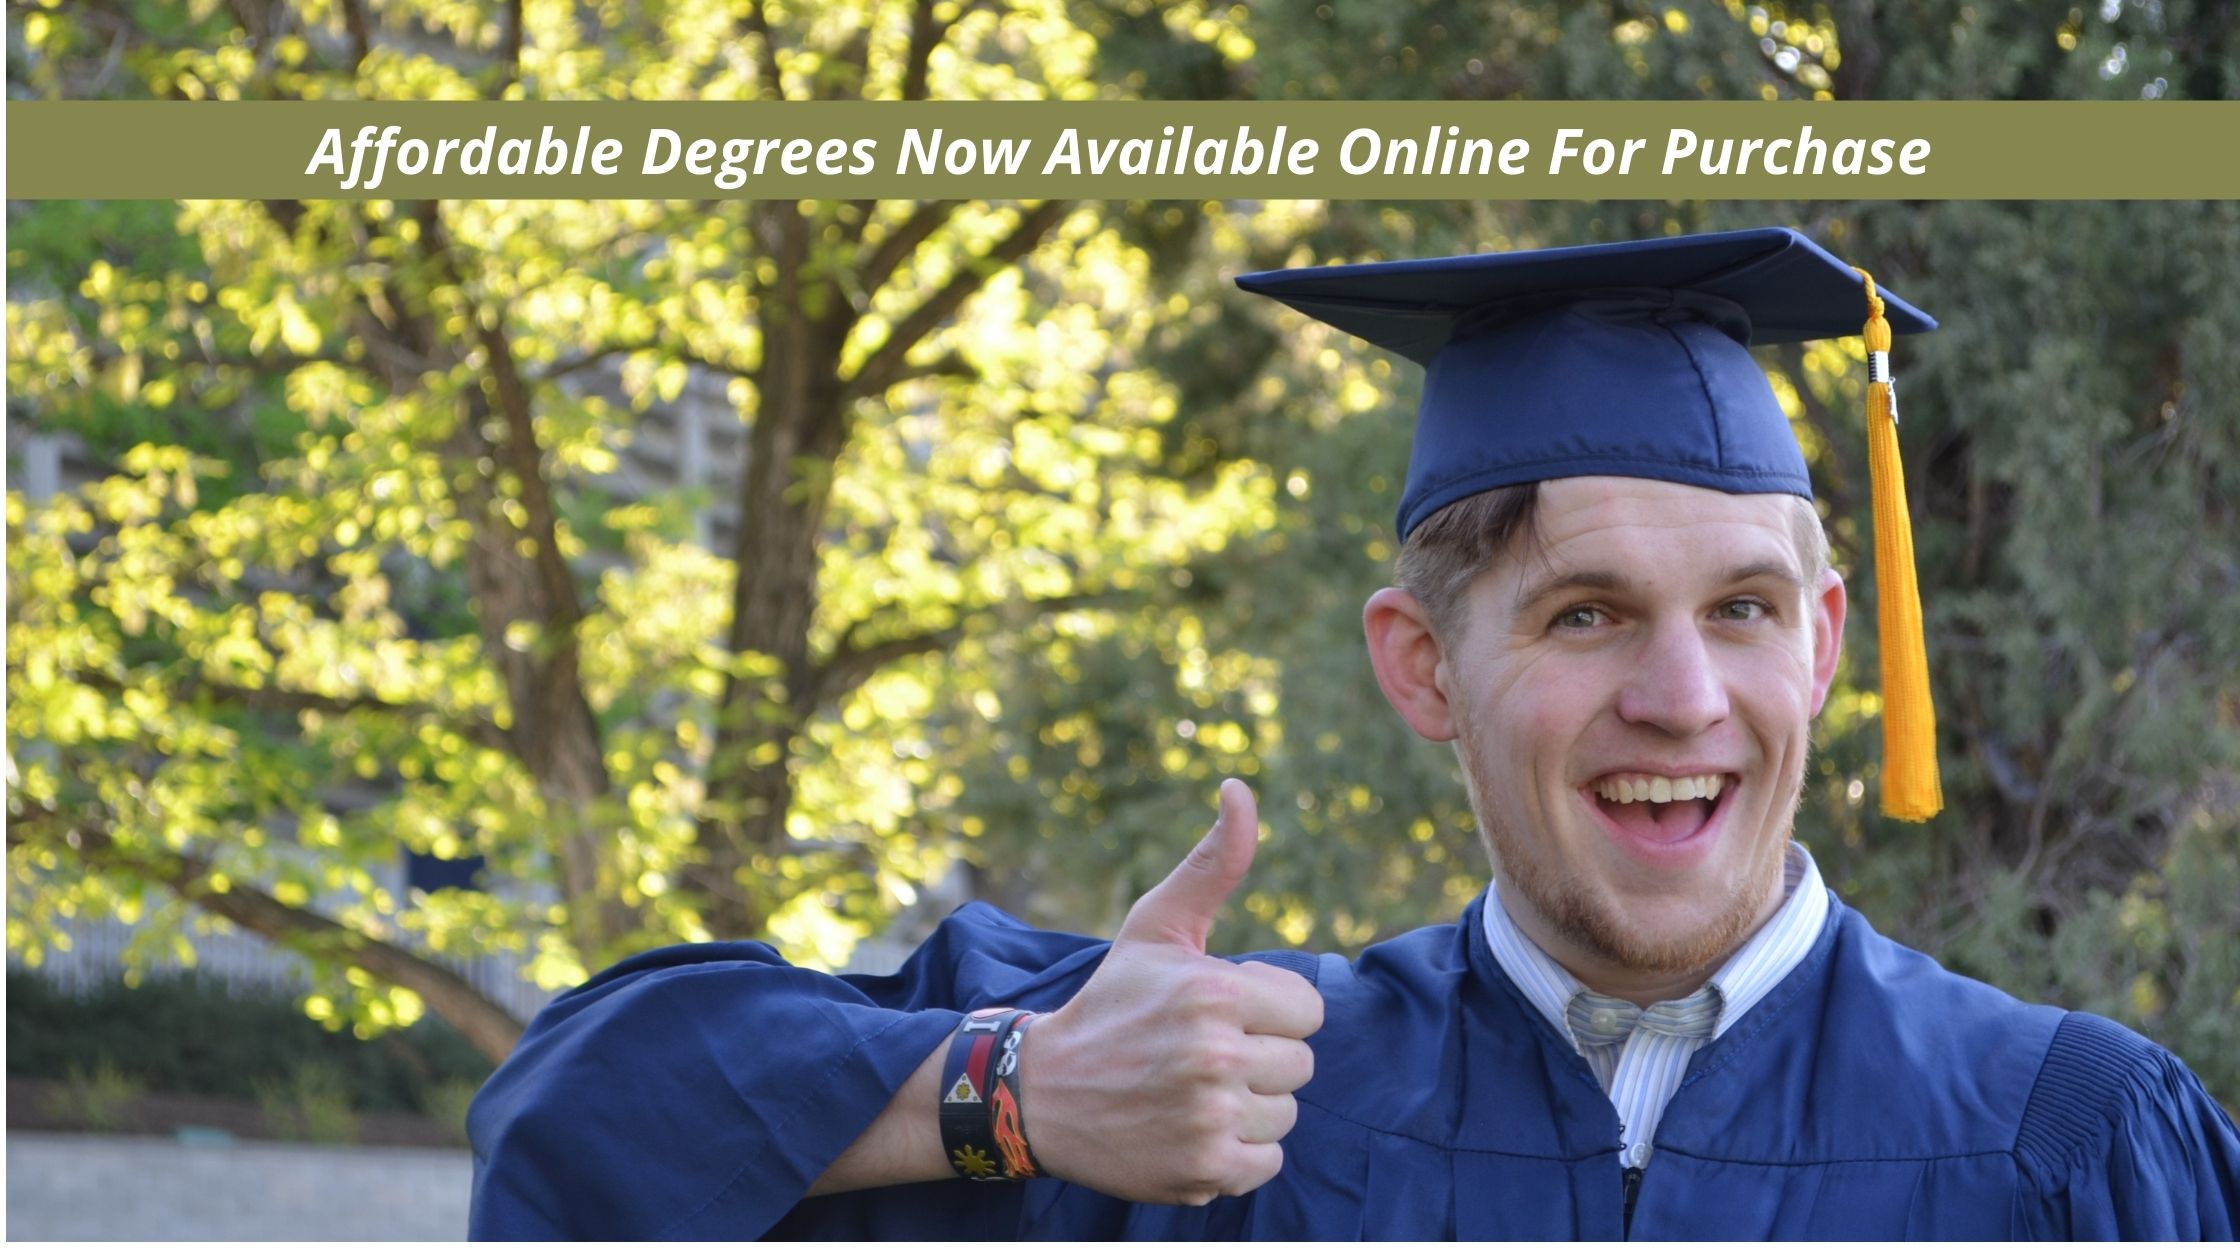 Affordable Degrees Now Available Online For Purchase